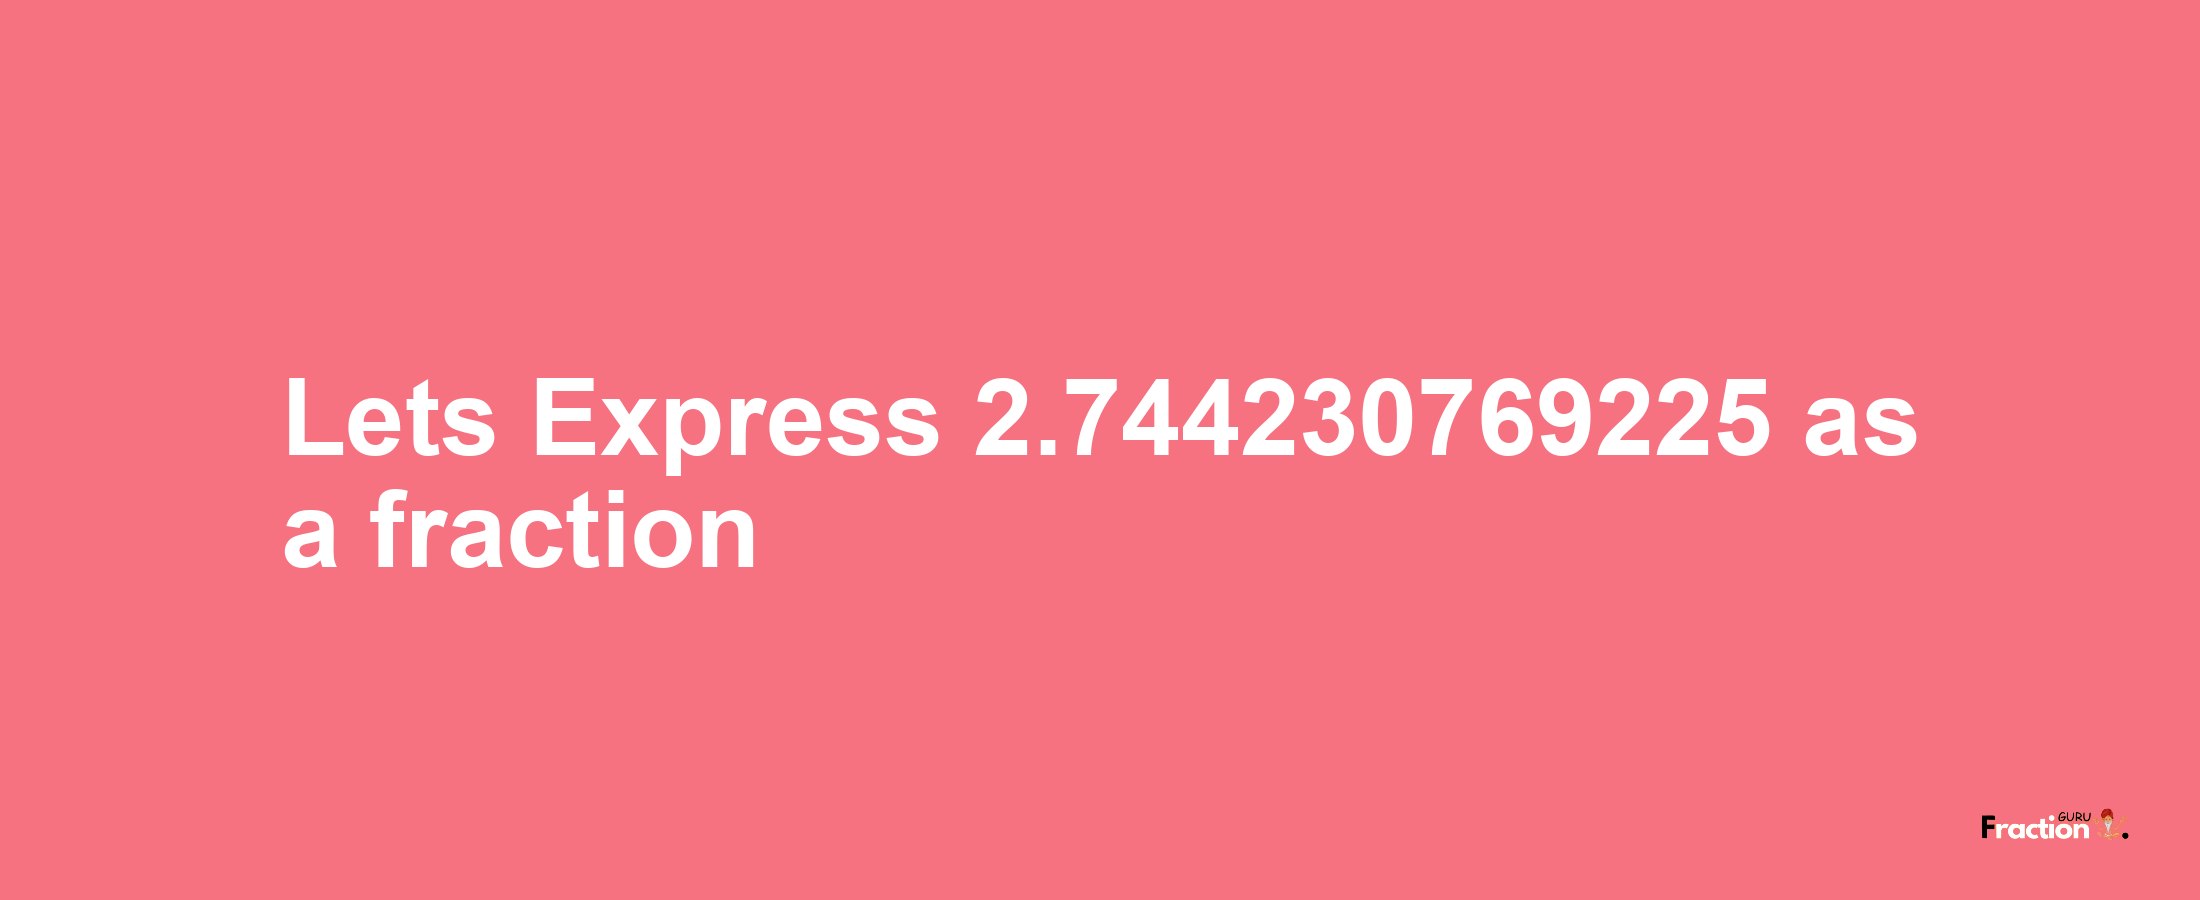 Lets Express 2.744230769225 as afraction